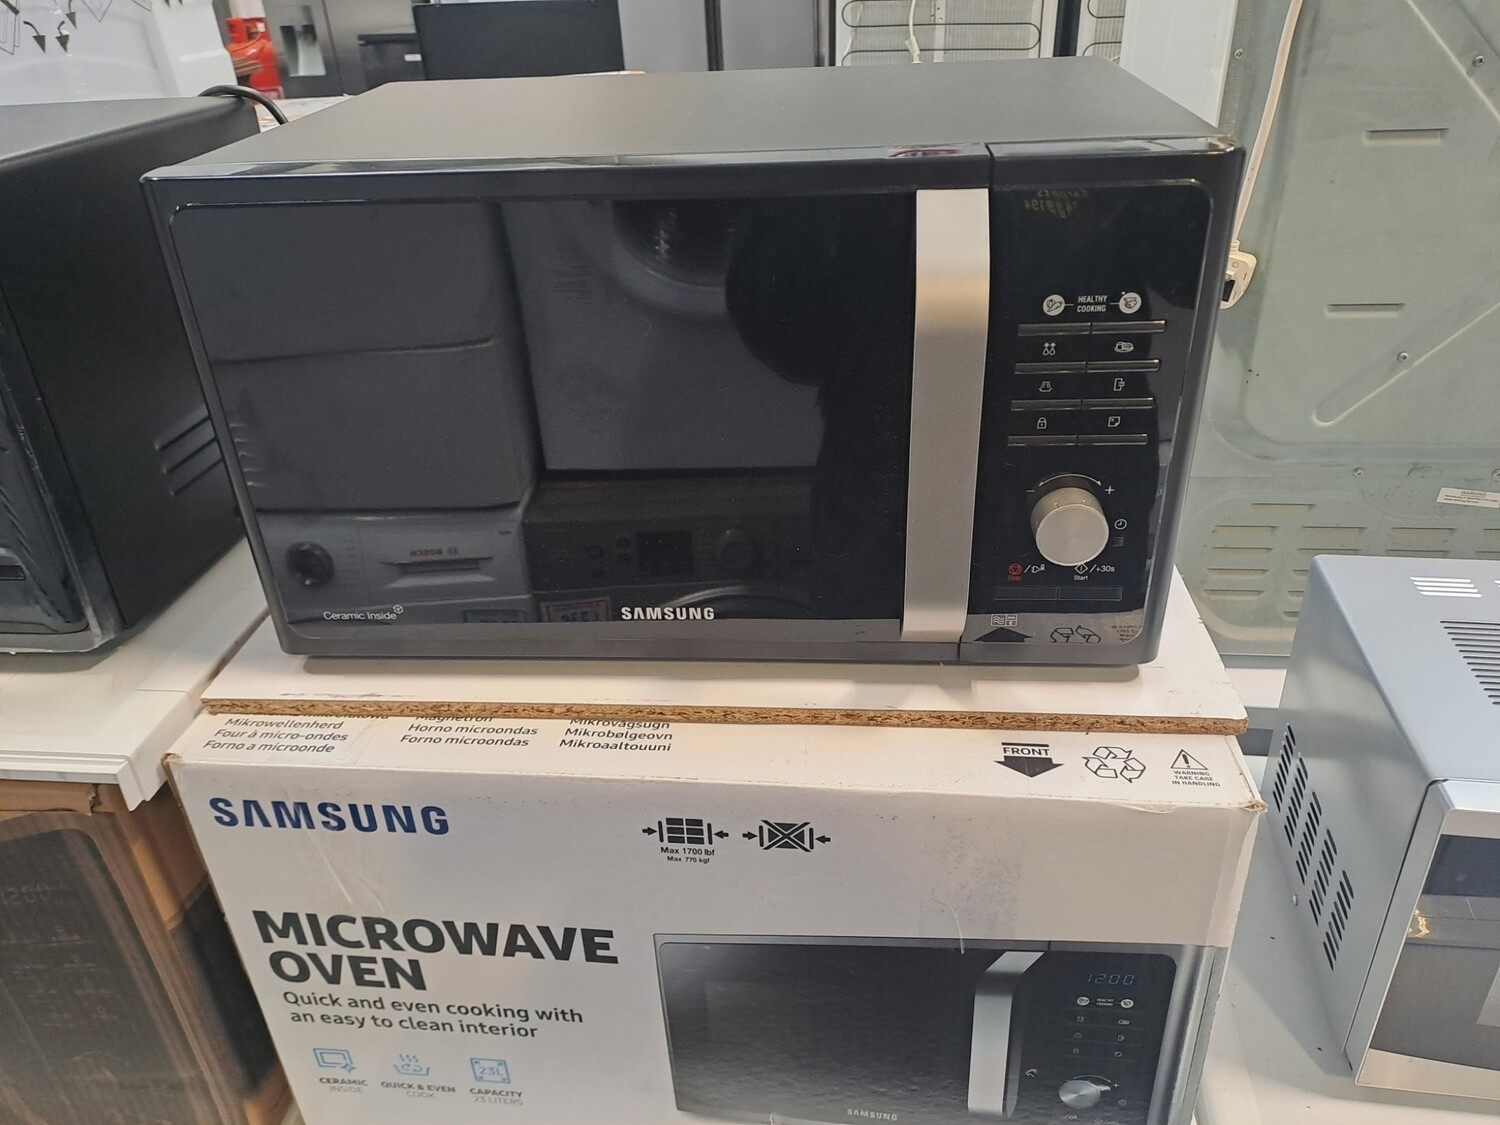 Samsung MS23F301TAK Microwave Oven Ceramic 800w 23Litre - Black - New Graded - 12 Month Guarantee